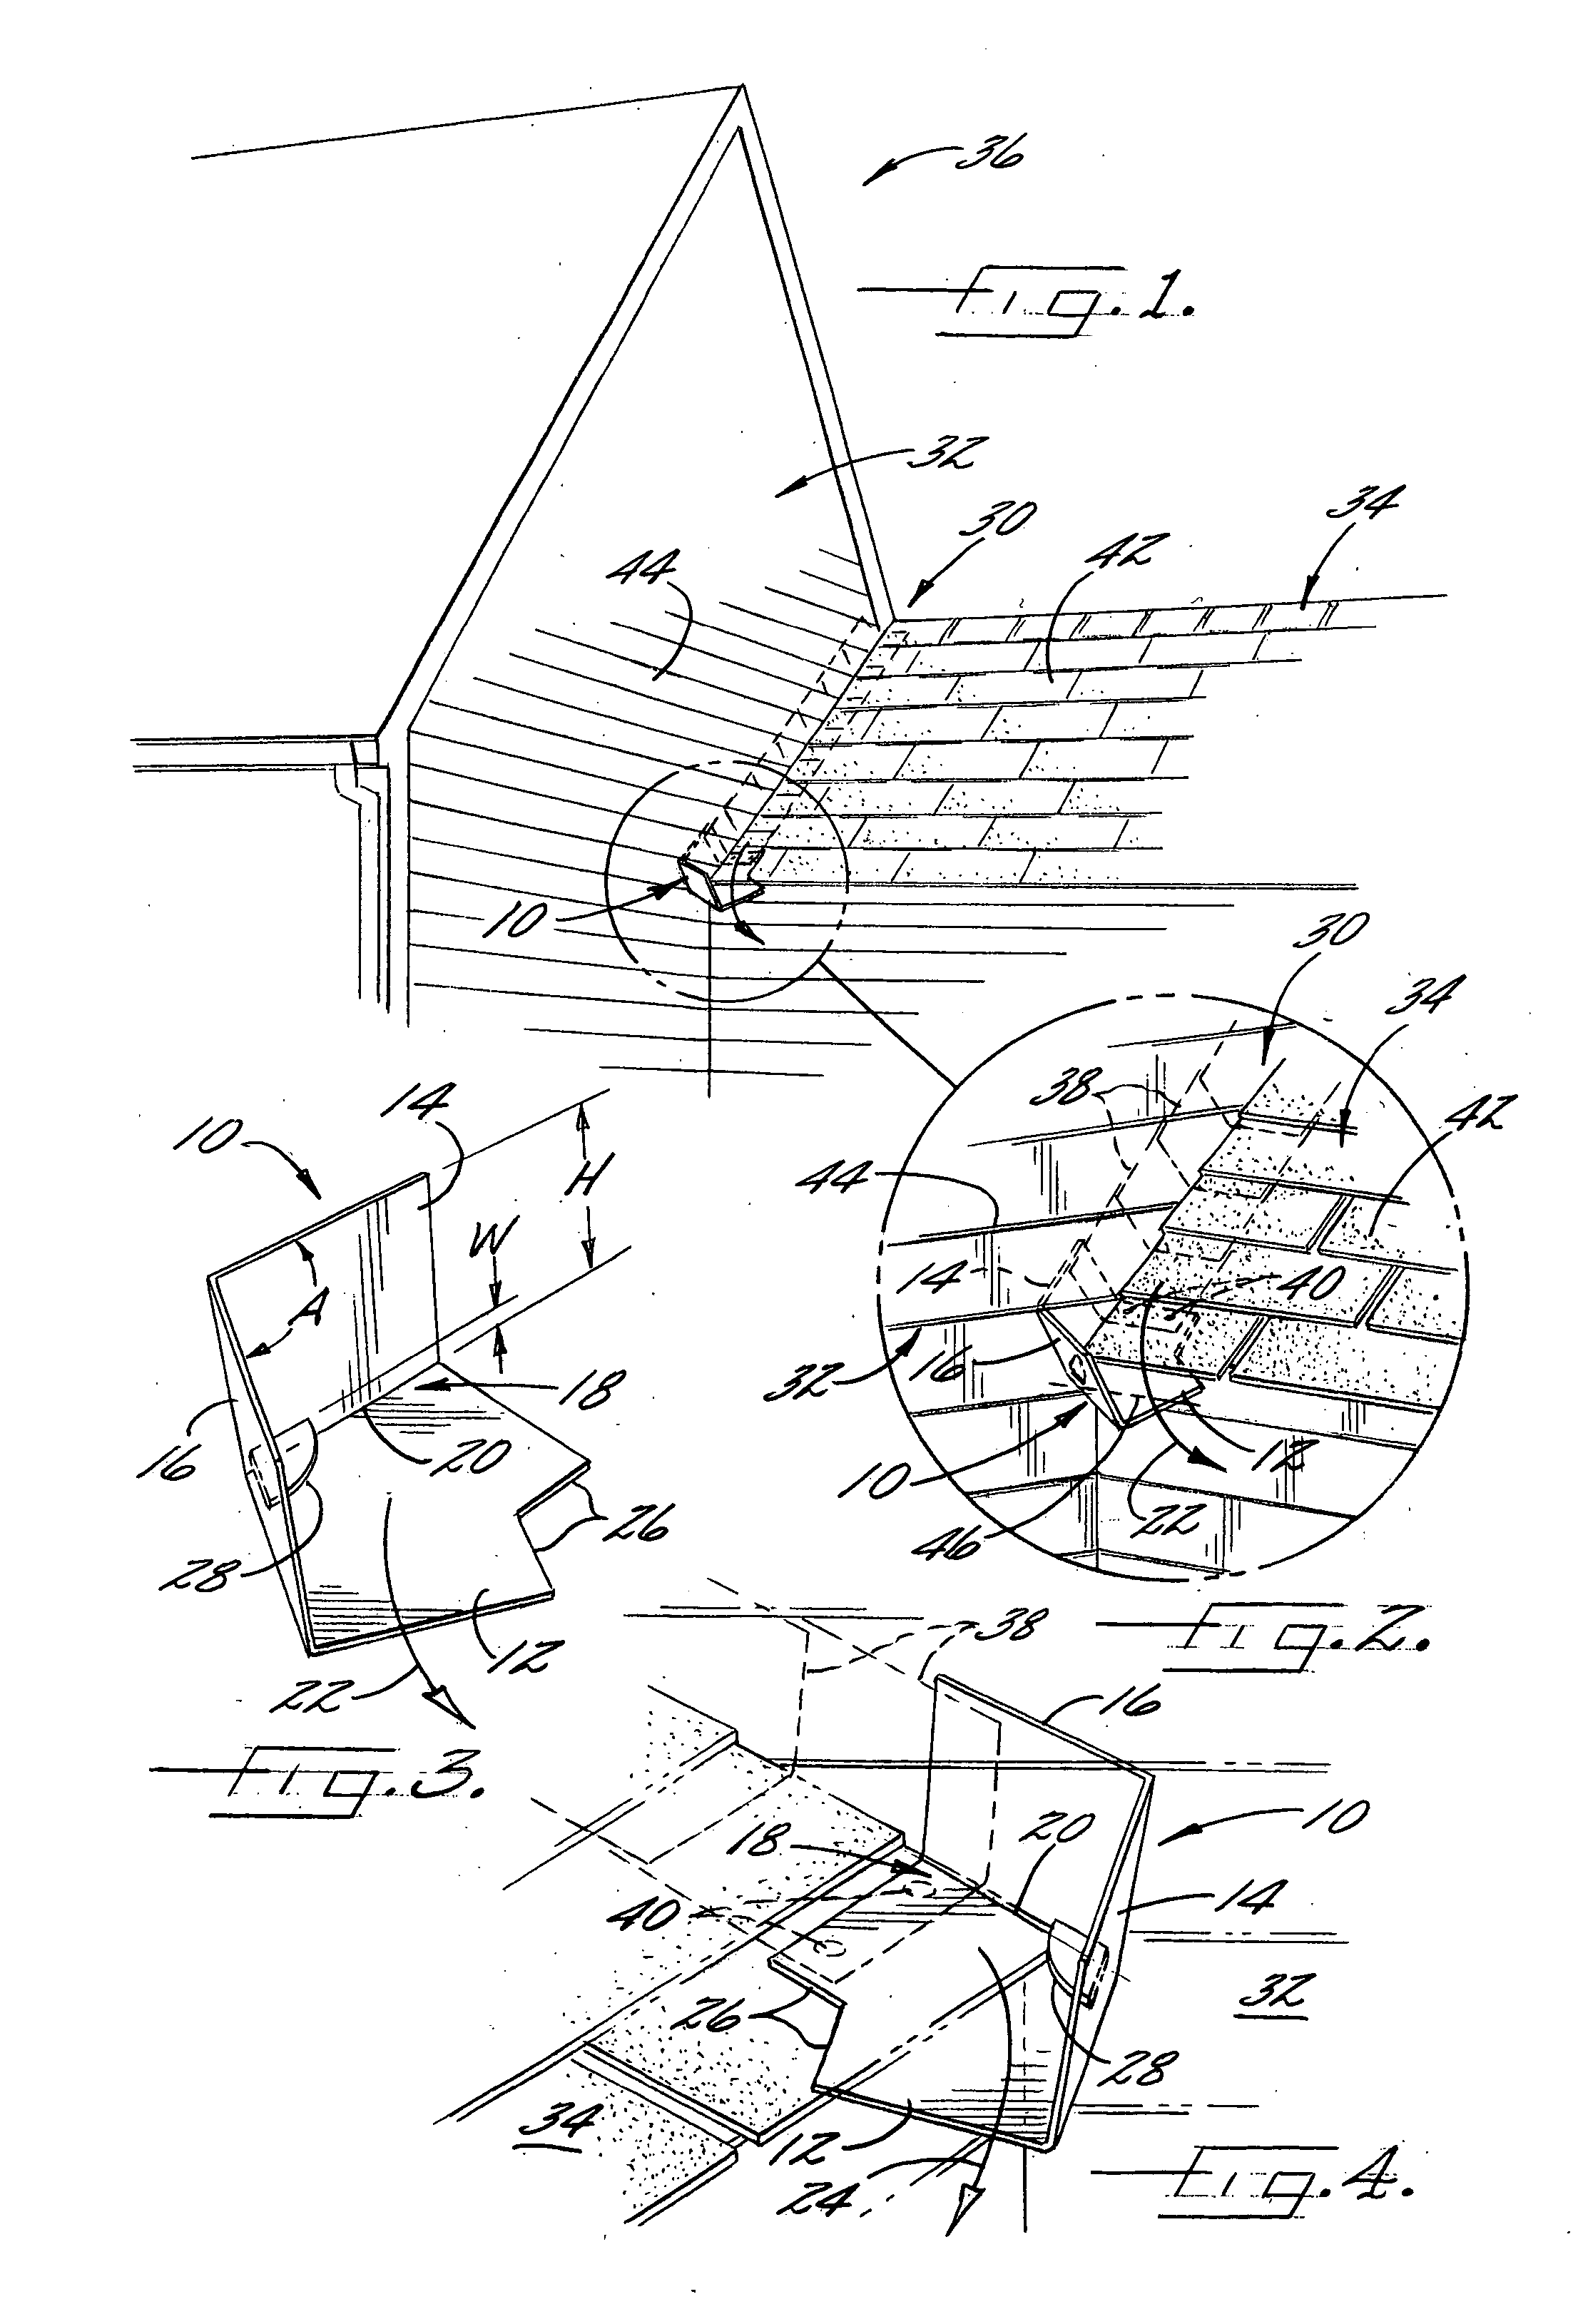 Kickout flashing and associated assembly and method